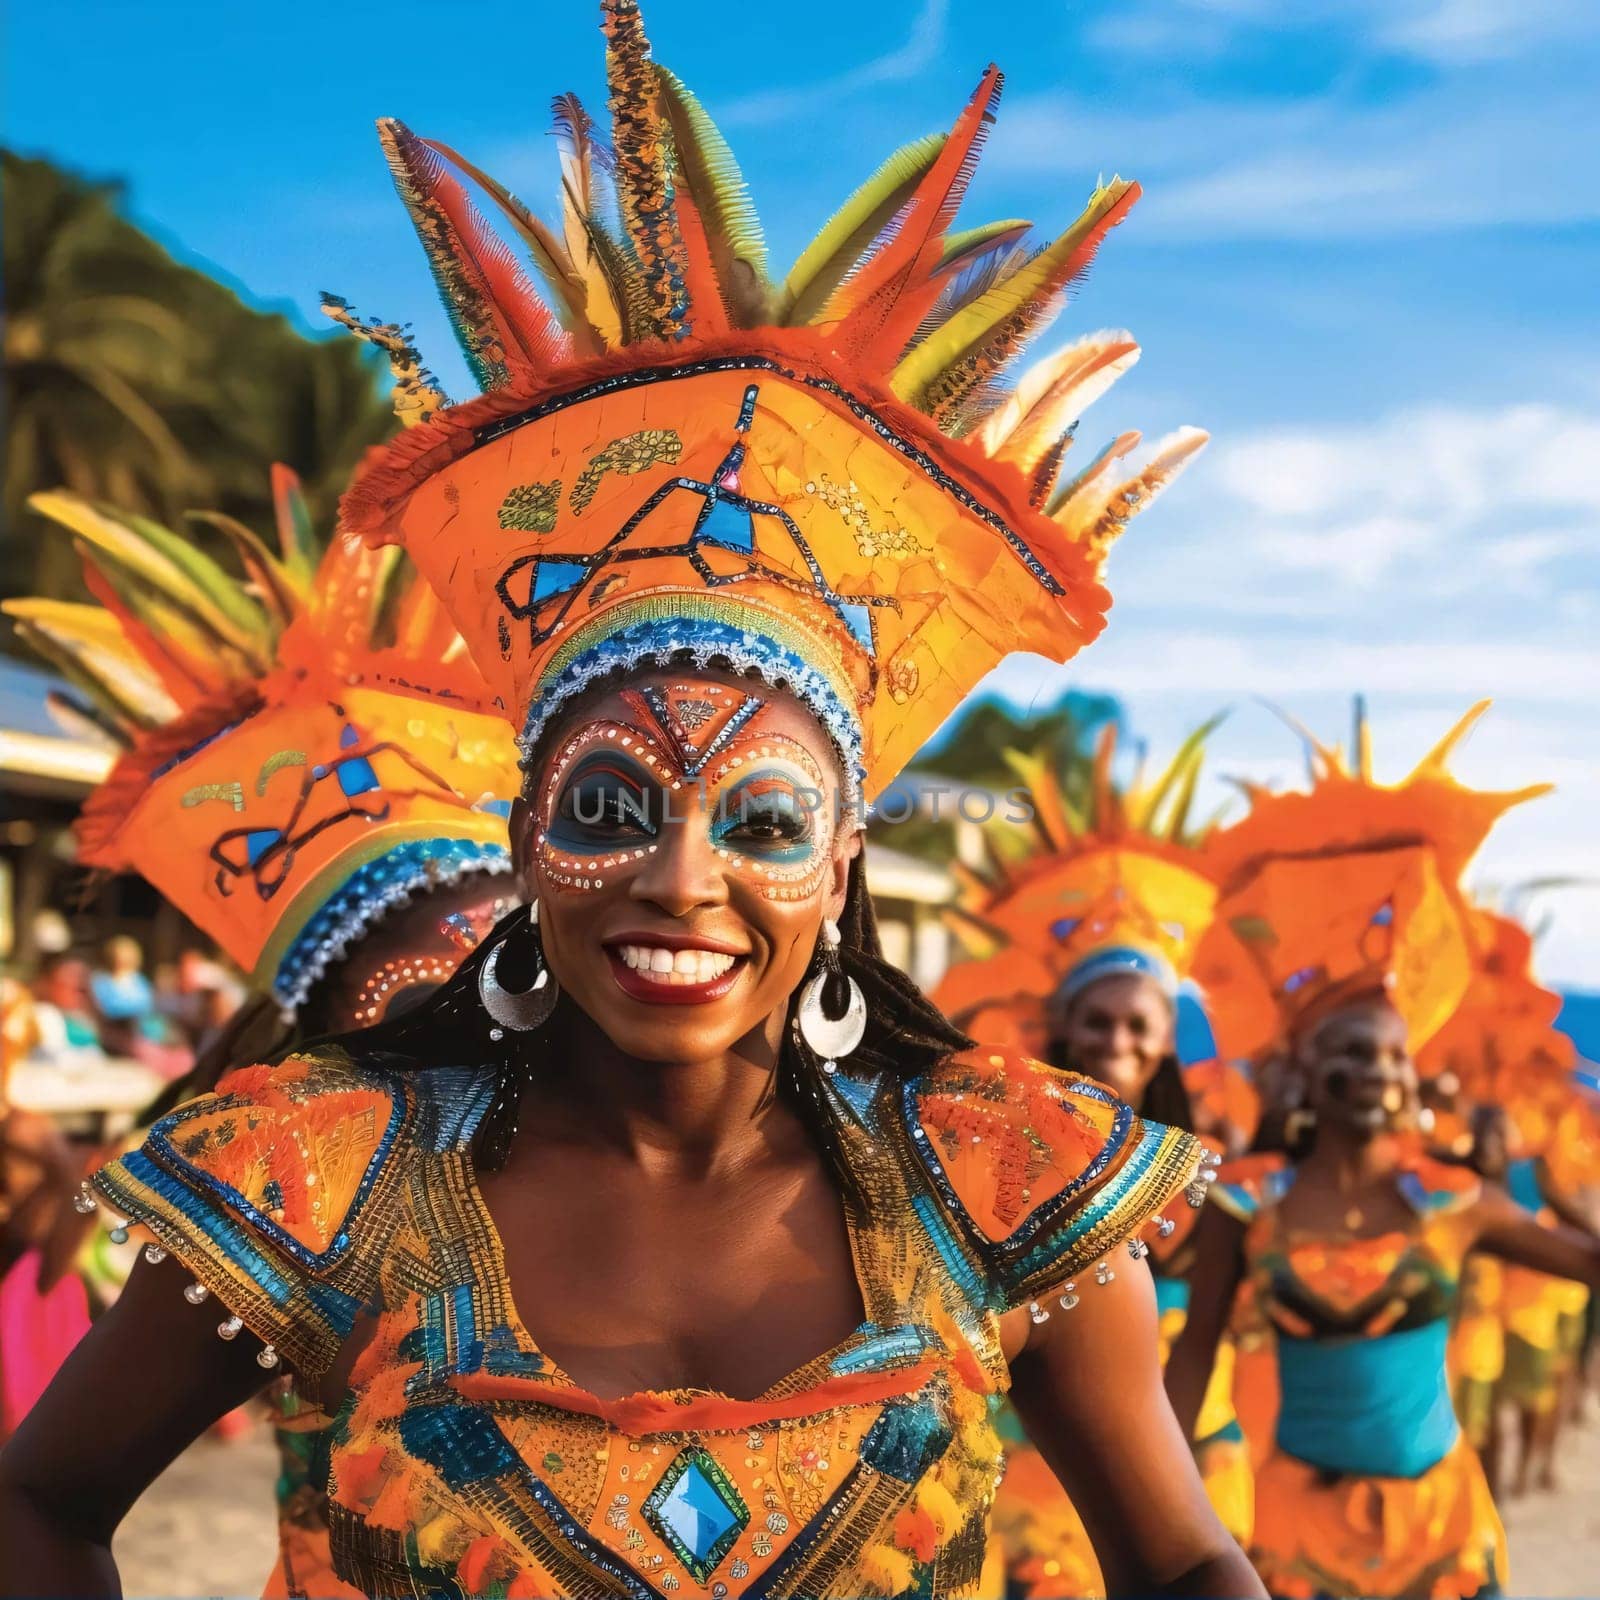 Smiling black woman in carnival costume, dominant orange color beach. Carnival outfits, masks and decorations. A time of fun and celebration before the fast.